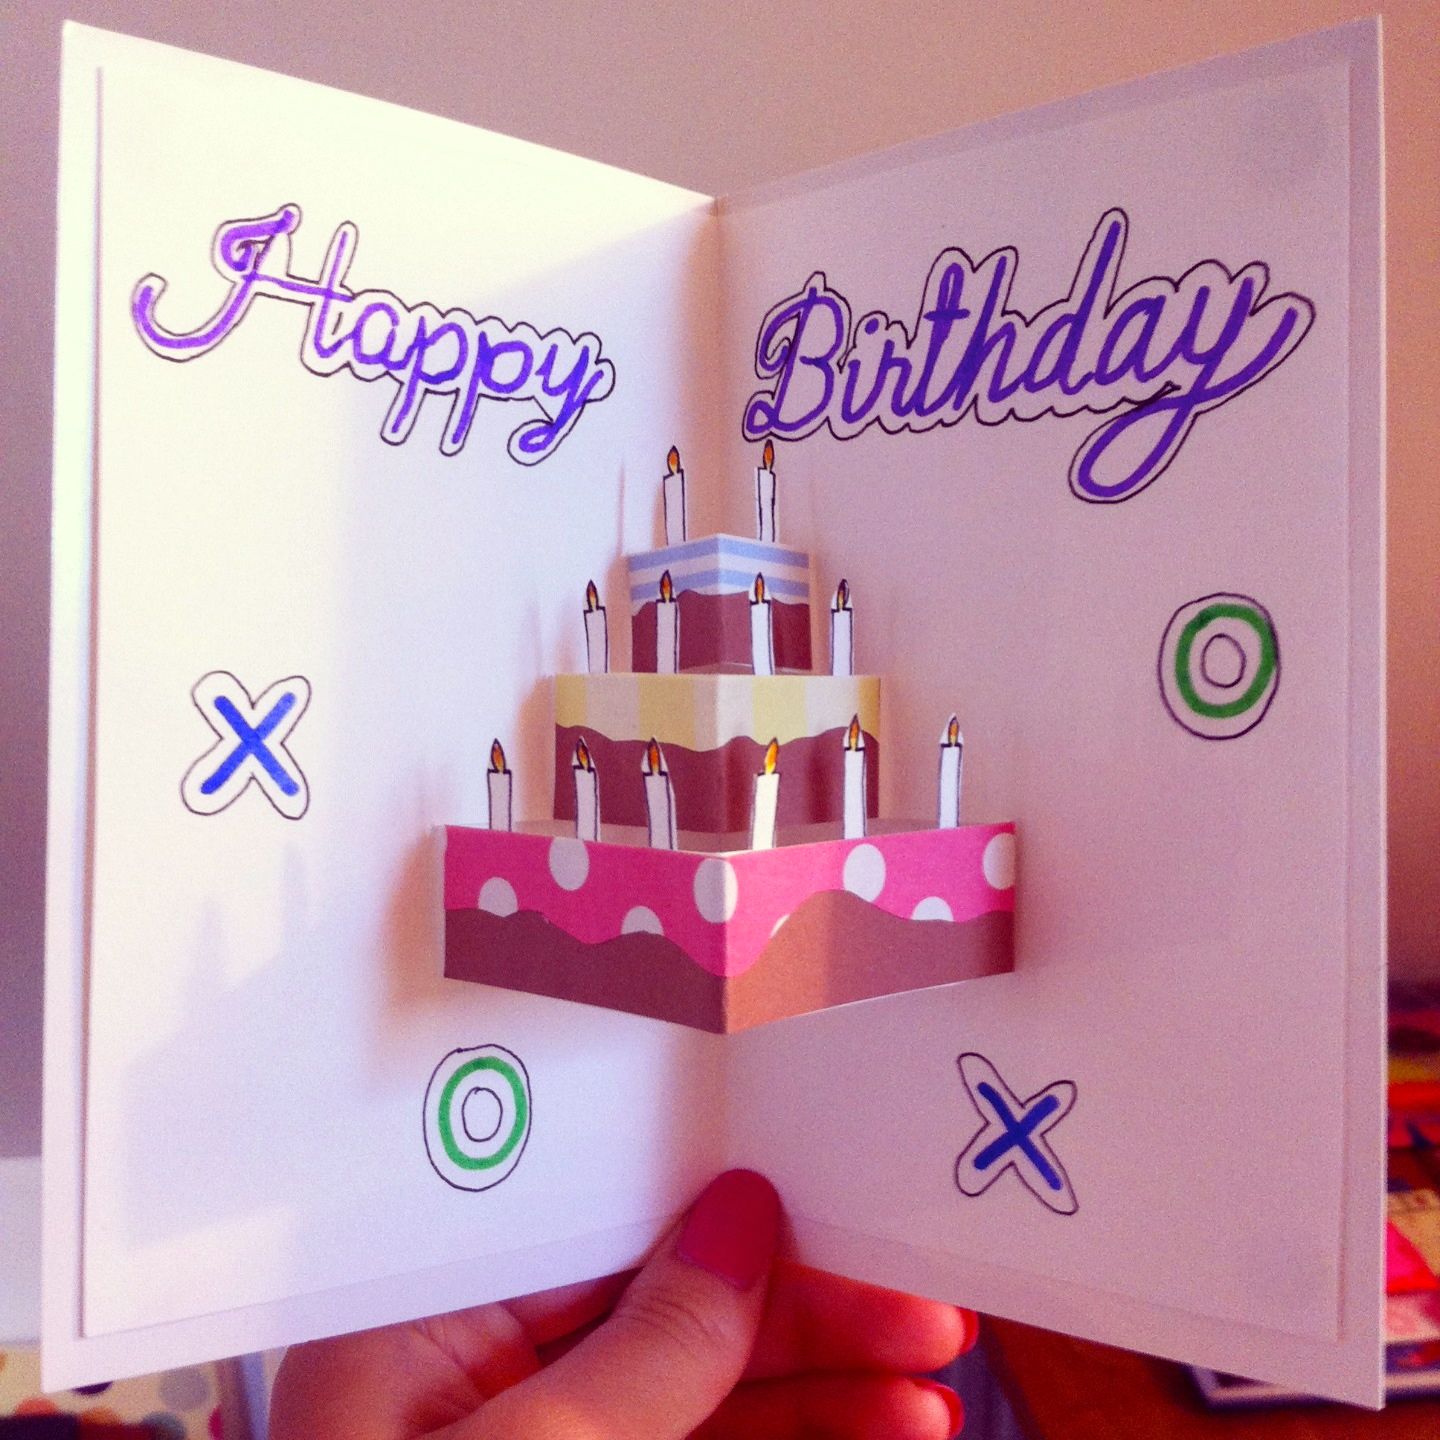 pop-up birthday card for sister